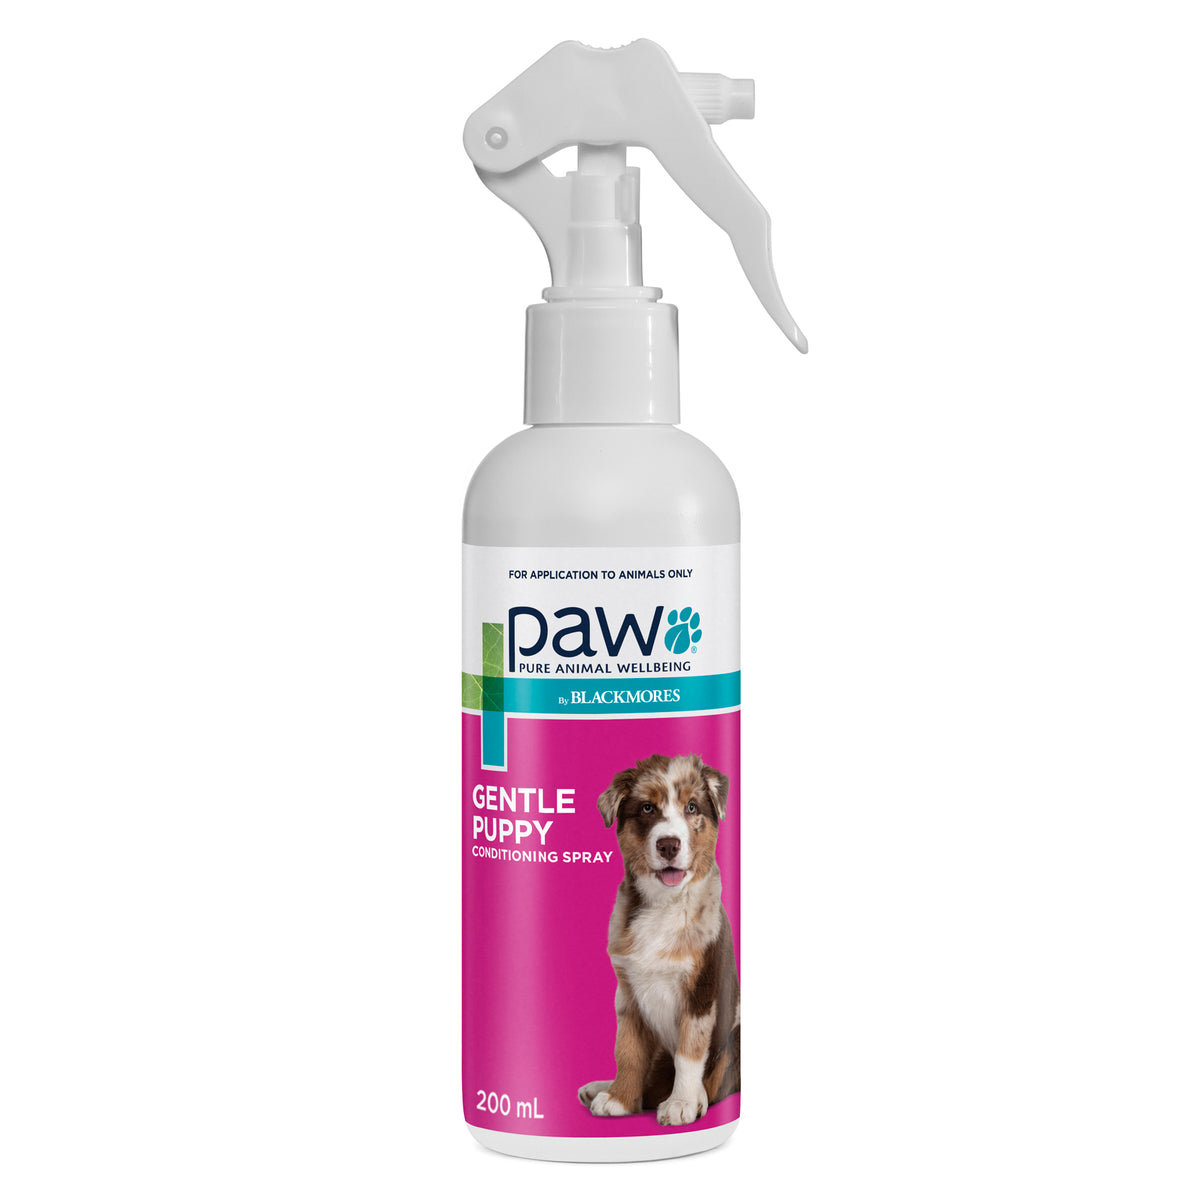 PAW Gentle Puppy Shampoo or Conditioning Spray